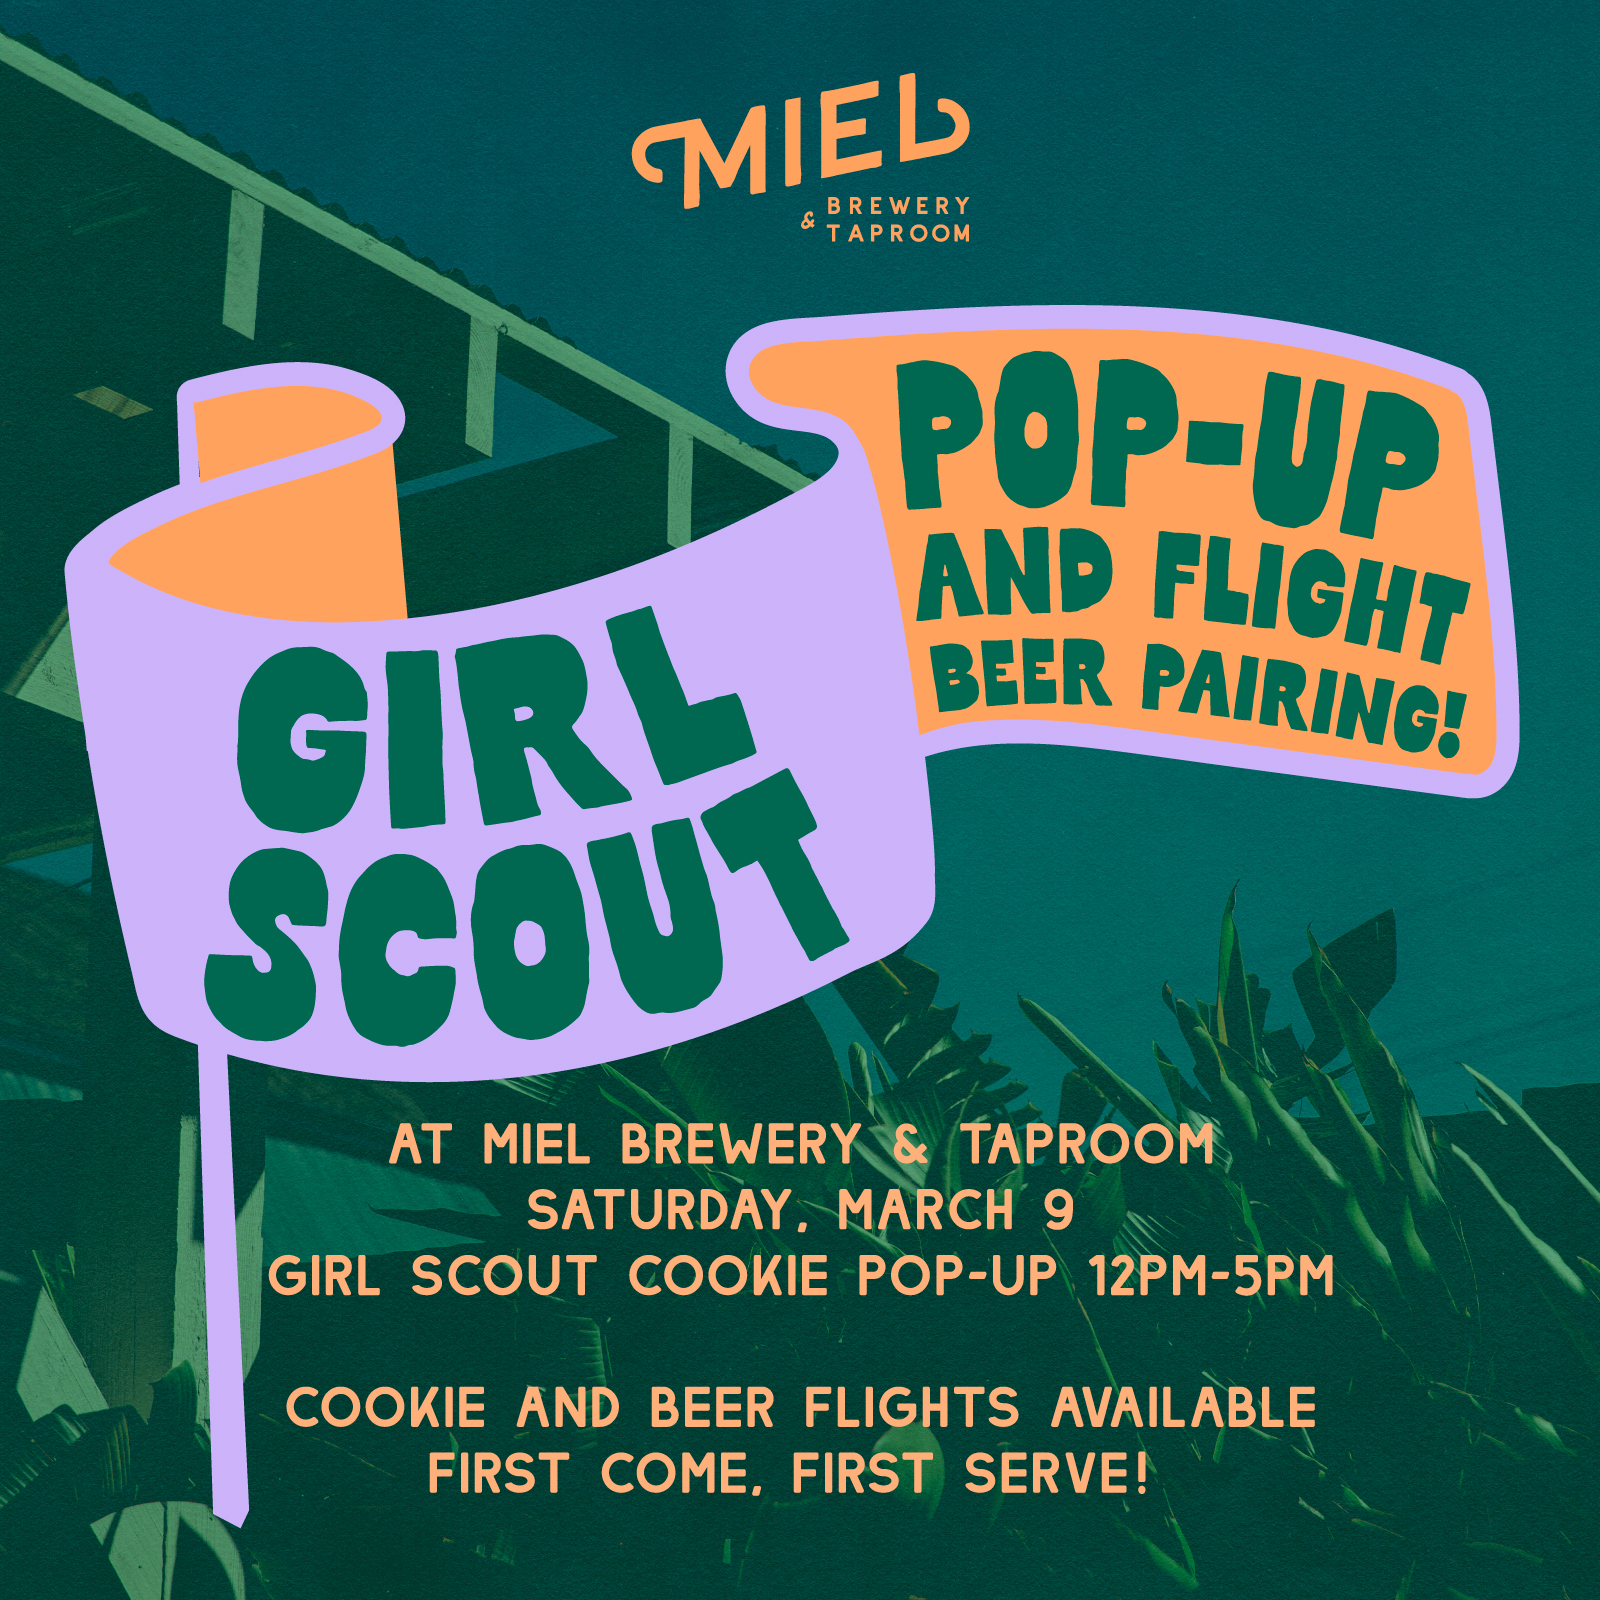 Girl Scout Cookie pairing at Miel brewery square flyer